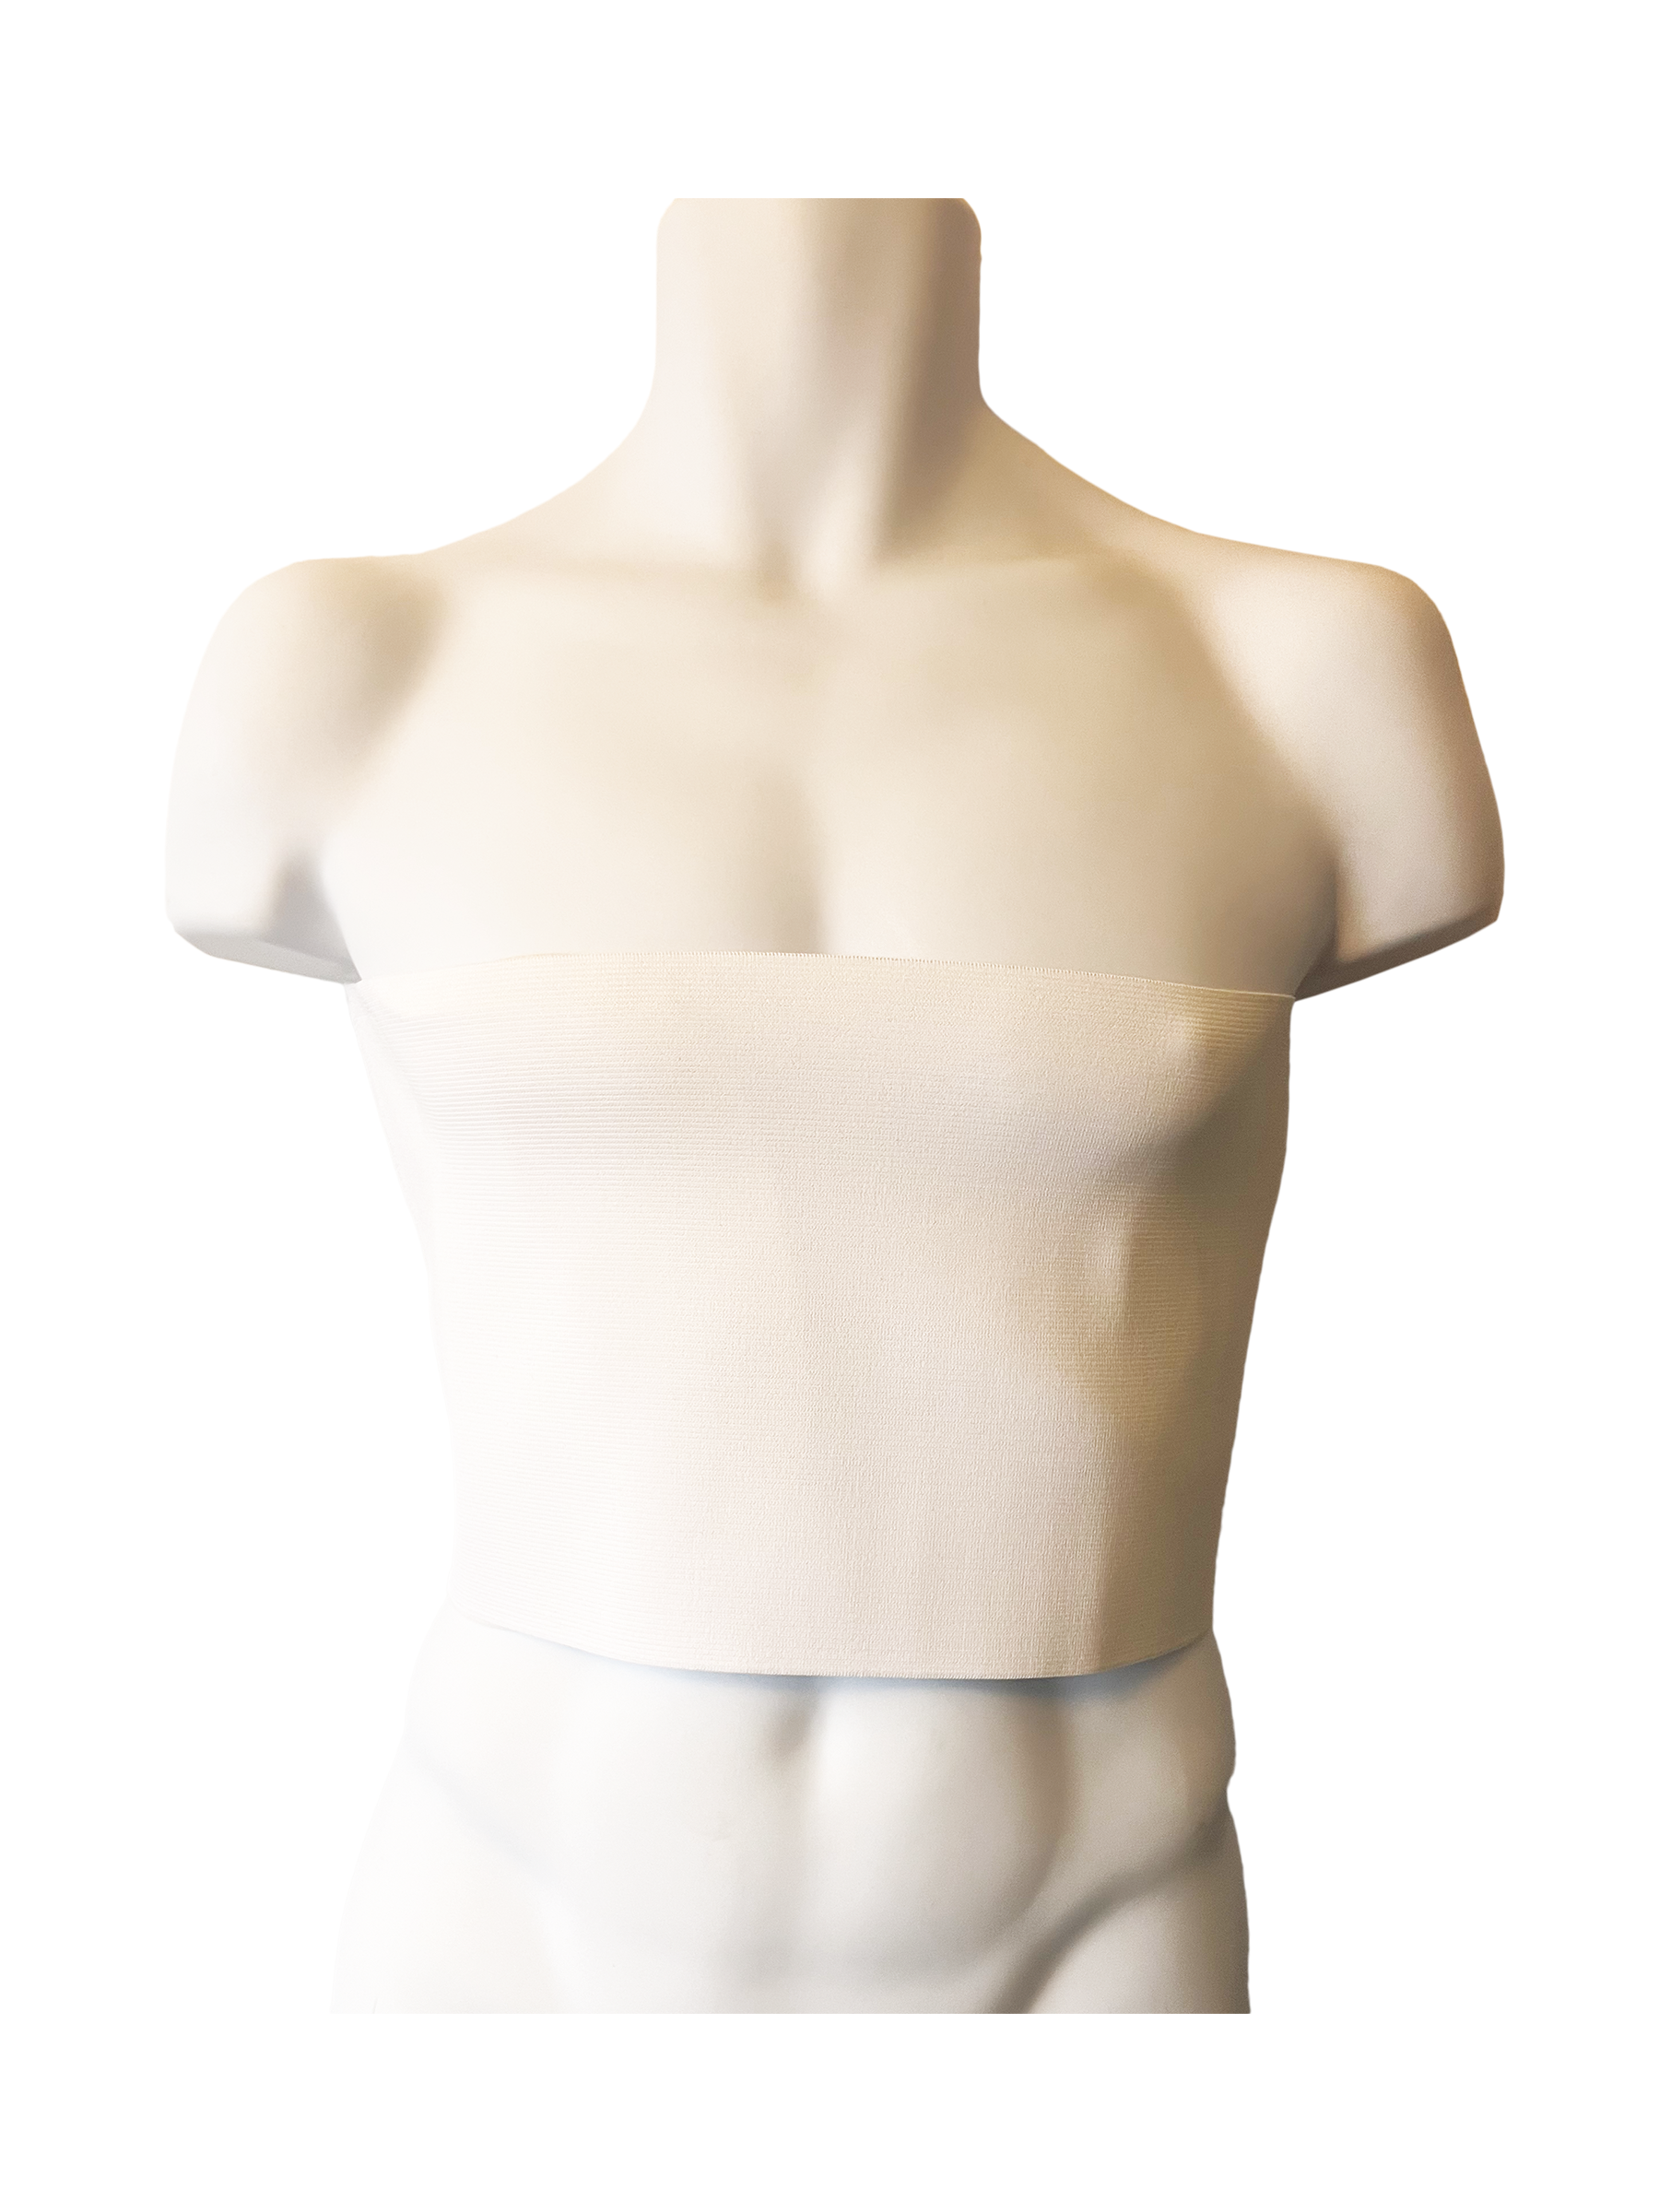 Underworks Post-Surgical Chest Binder - Come As You Are